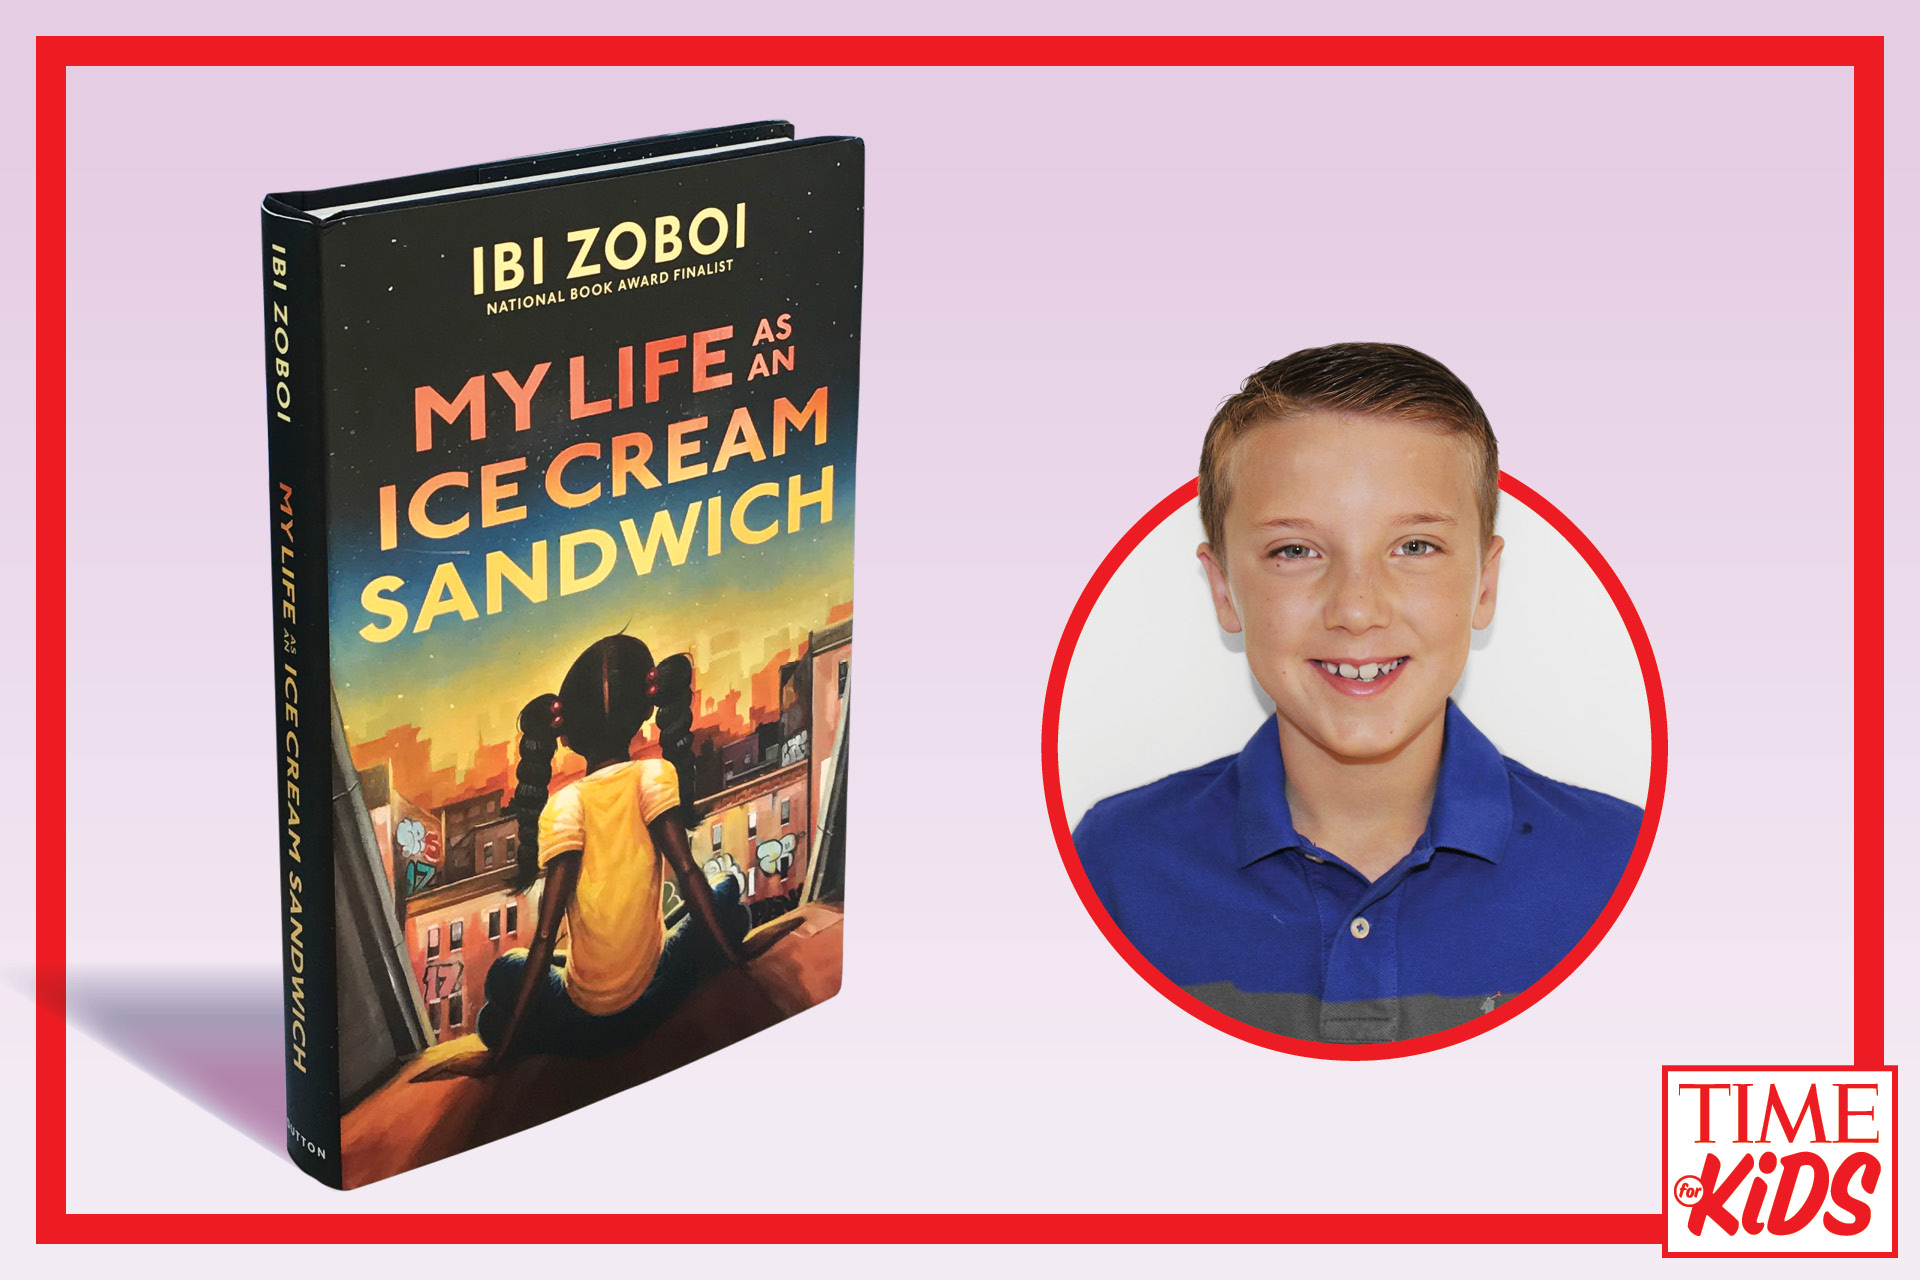 TFK Kid Reporter Henry Carroll Reviews My Life as an Ice Cream Sandwich by Ibi Zoboi